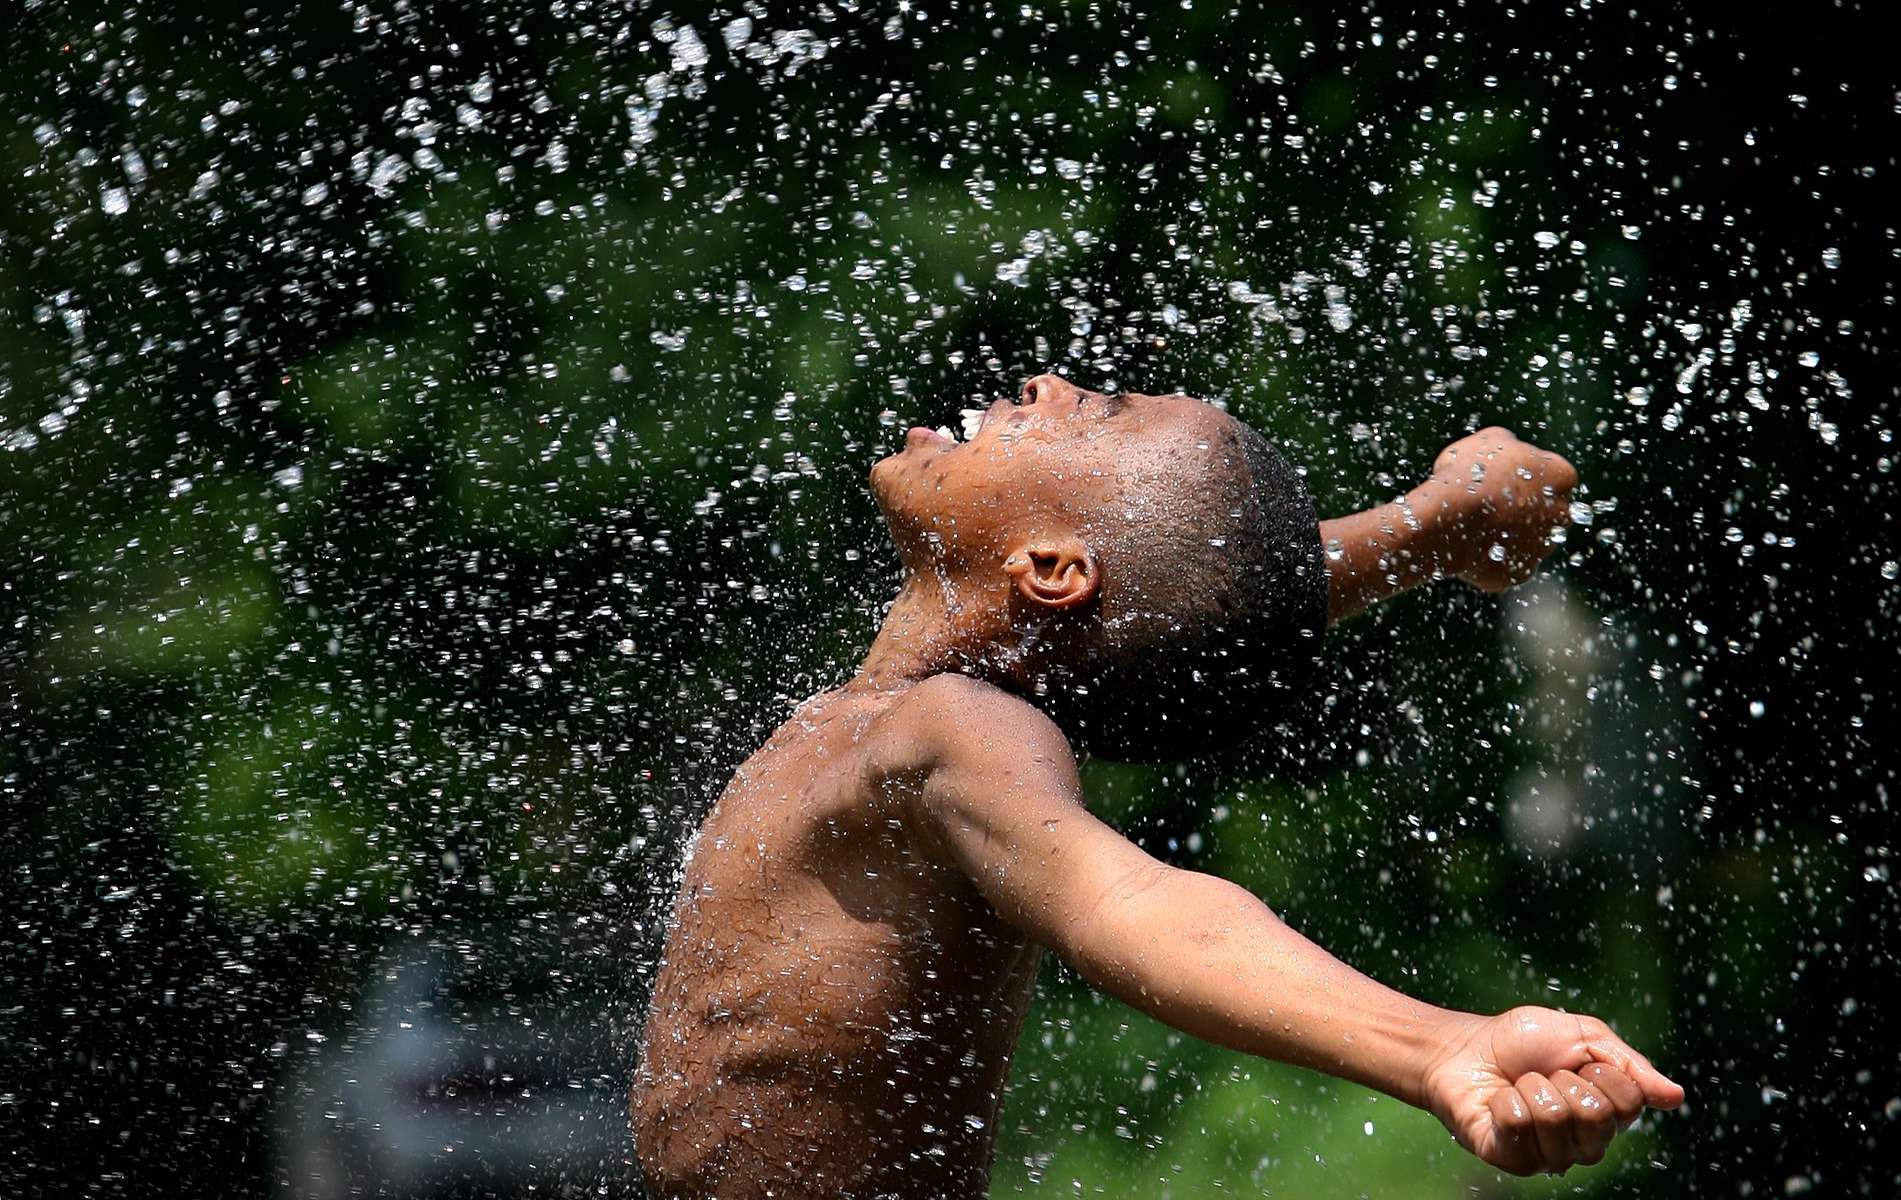 Thursday June 25, 2009--Gerrell Lawson, 12, basks in the spray of a garden hose as he plays with is friends is Hillsdale on Thursday.  Thursday marked the eighth straight day of temperatures above 90 and Saturday is expect to top out close to 100 with some cooling into the upper 80s expected for Sunday.David Carson    dcarson@post-dispatch.com